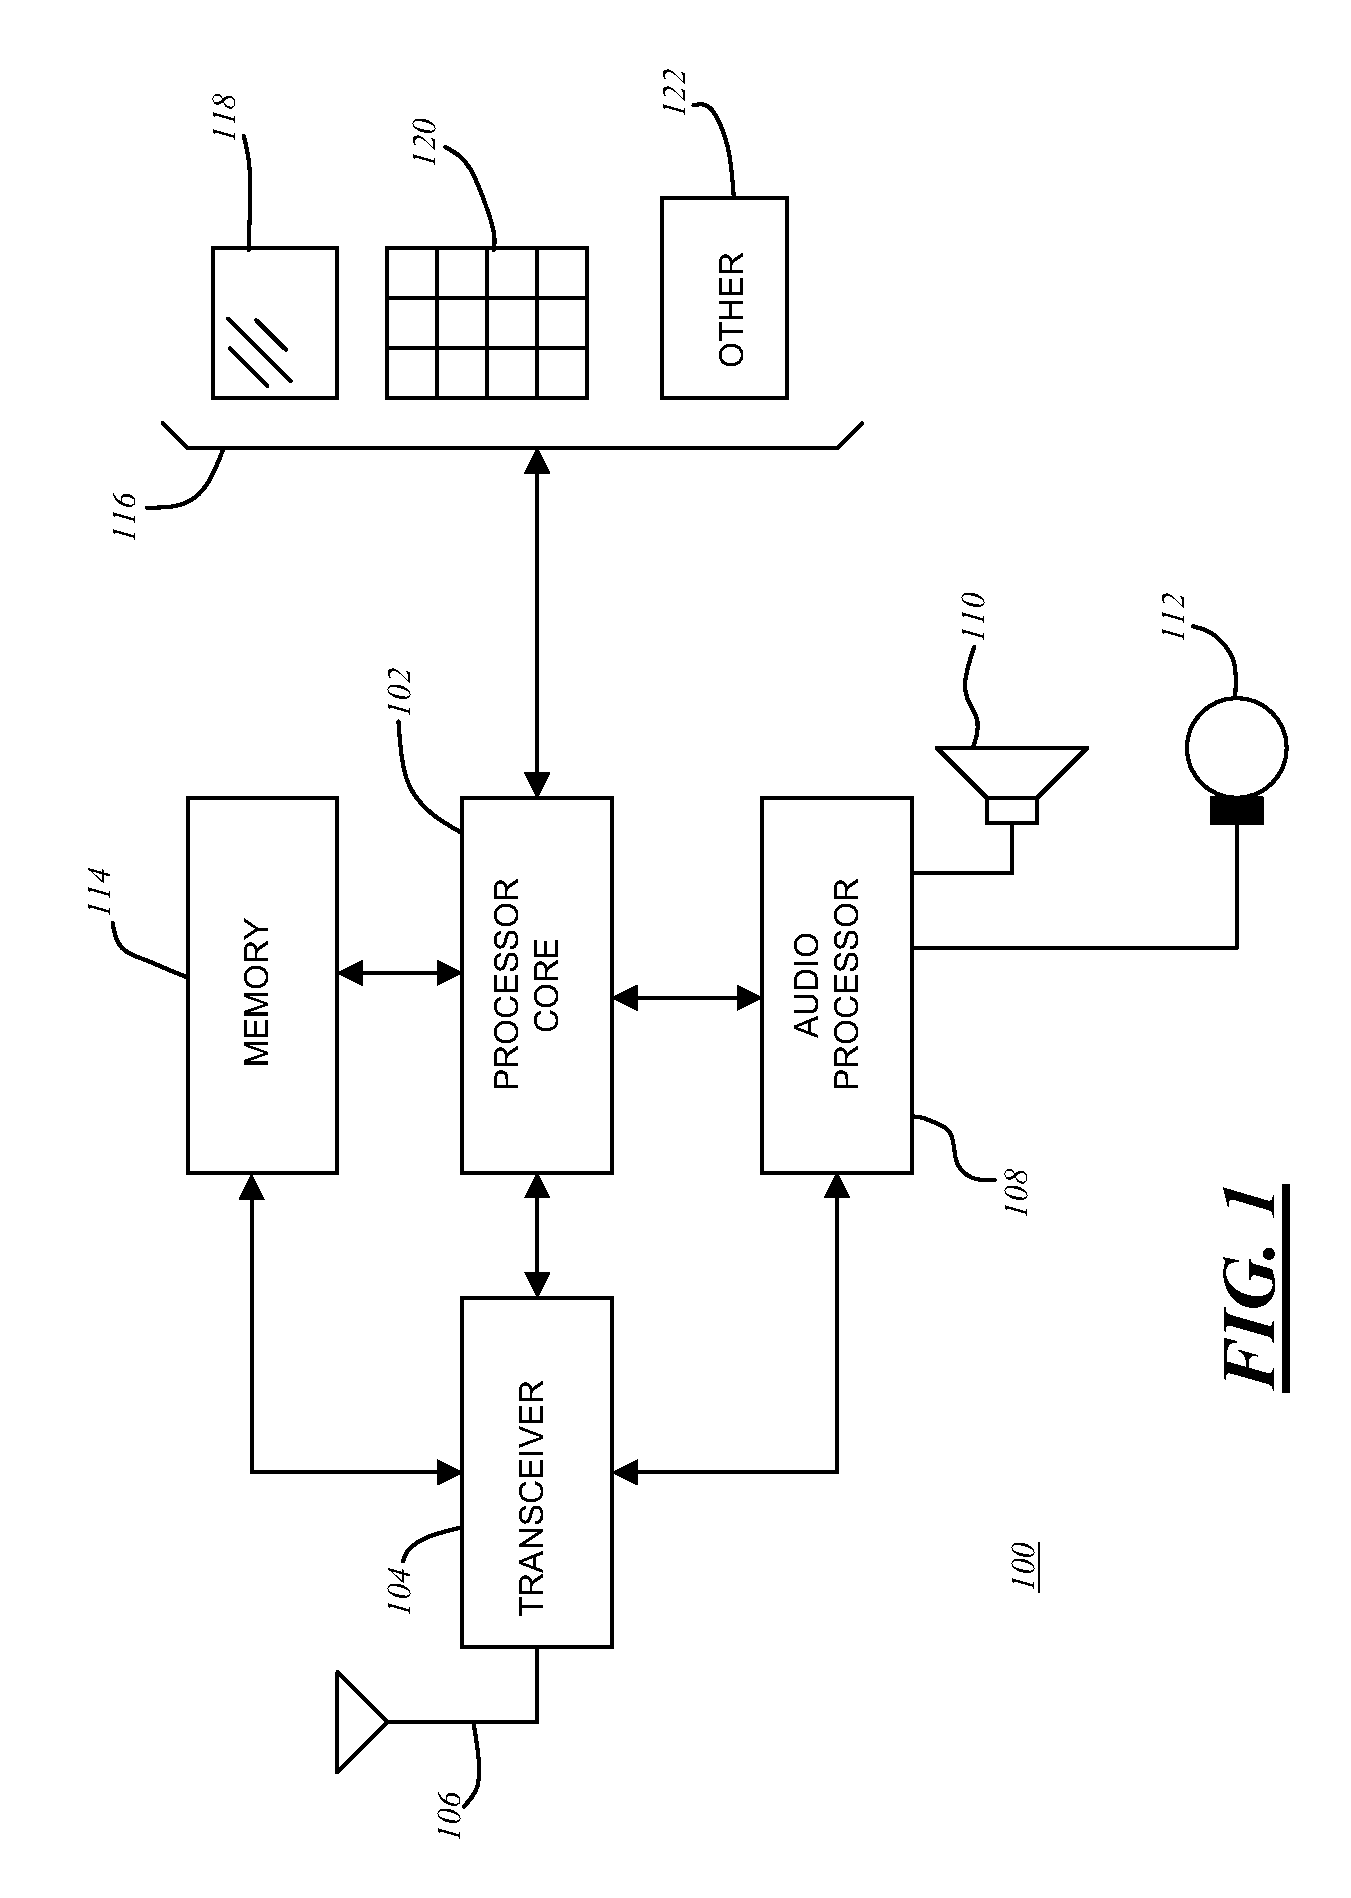 Method and apparatus for mixing priority and non-priority audio signals